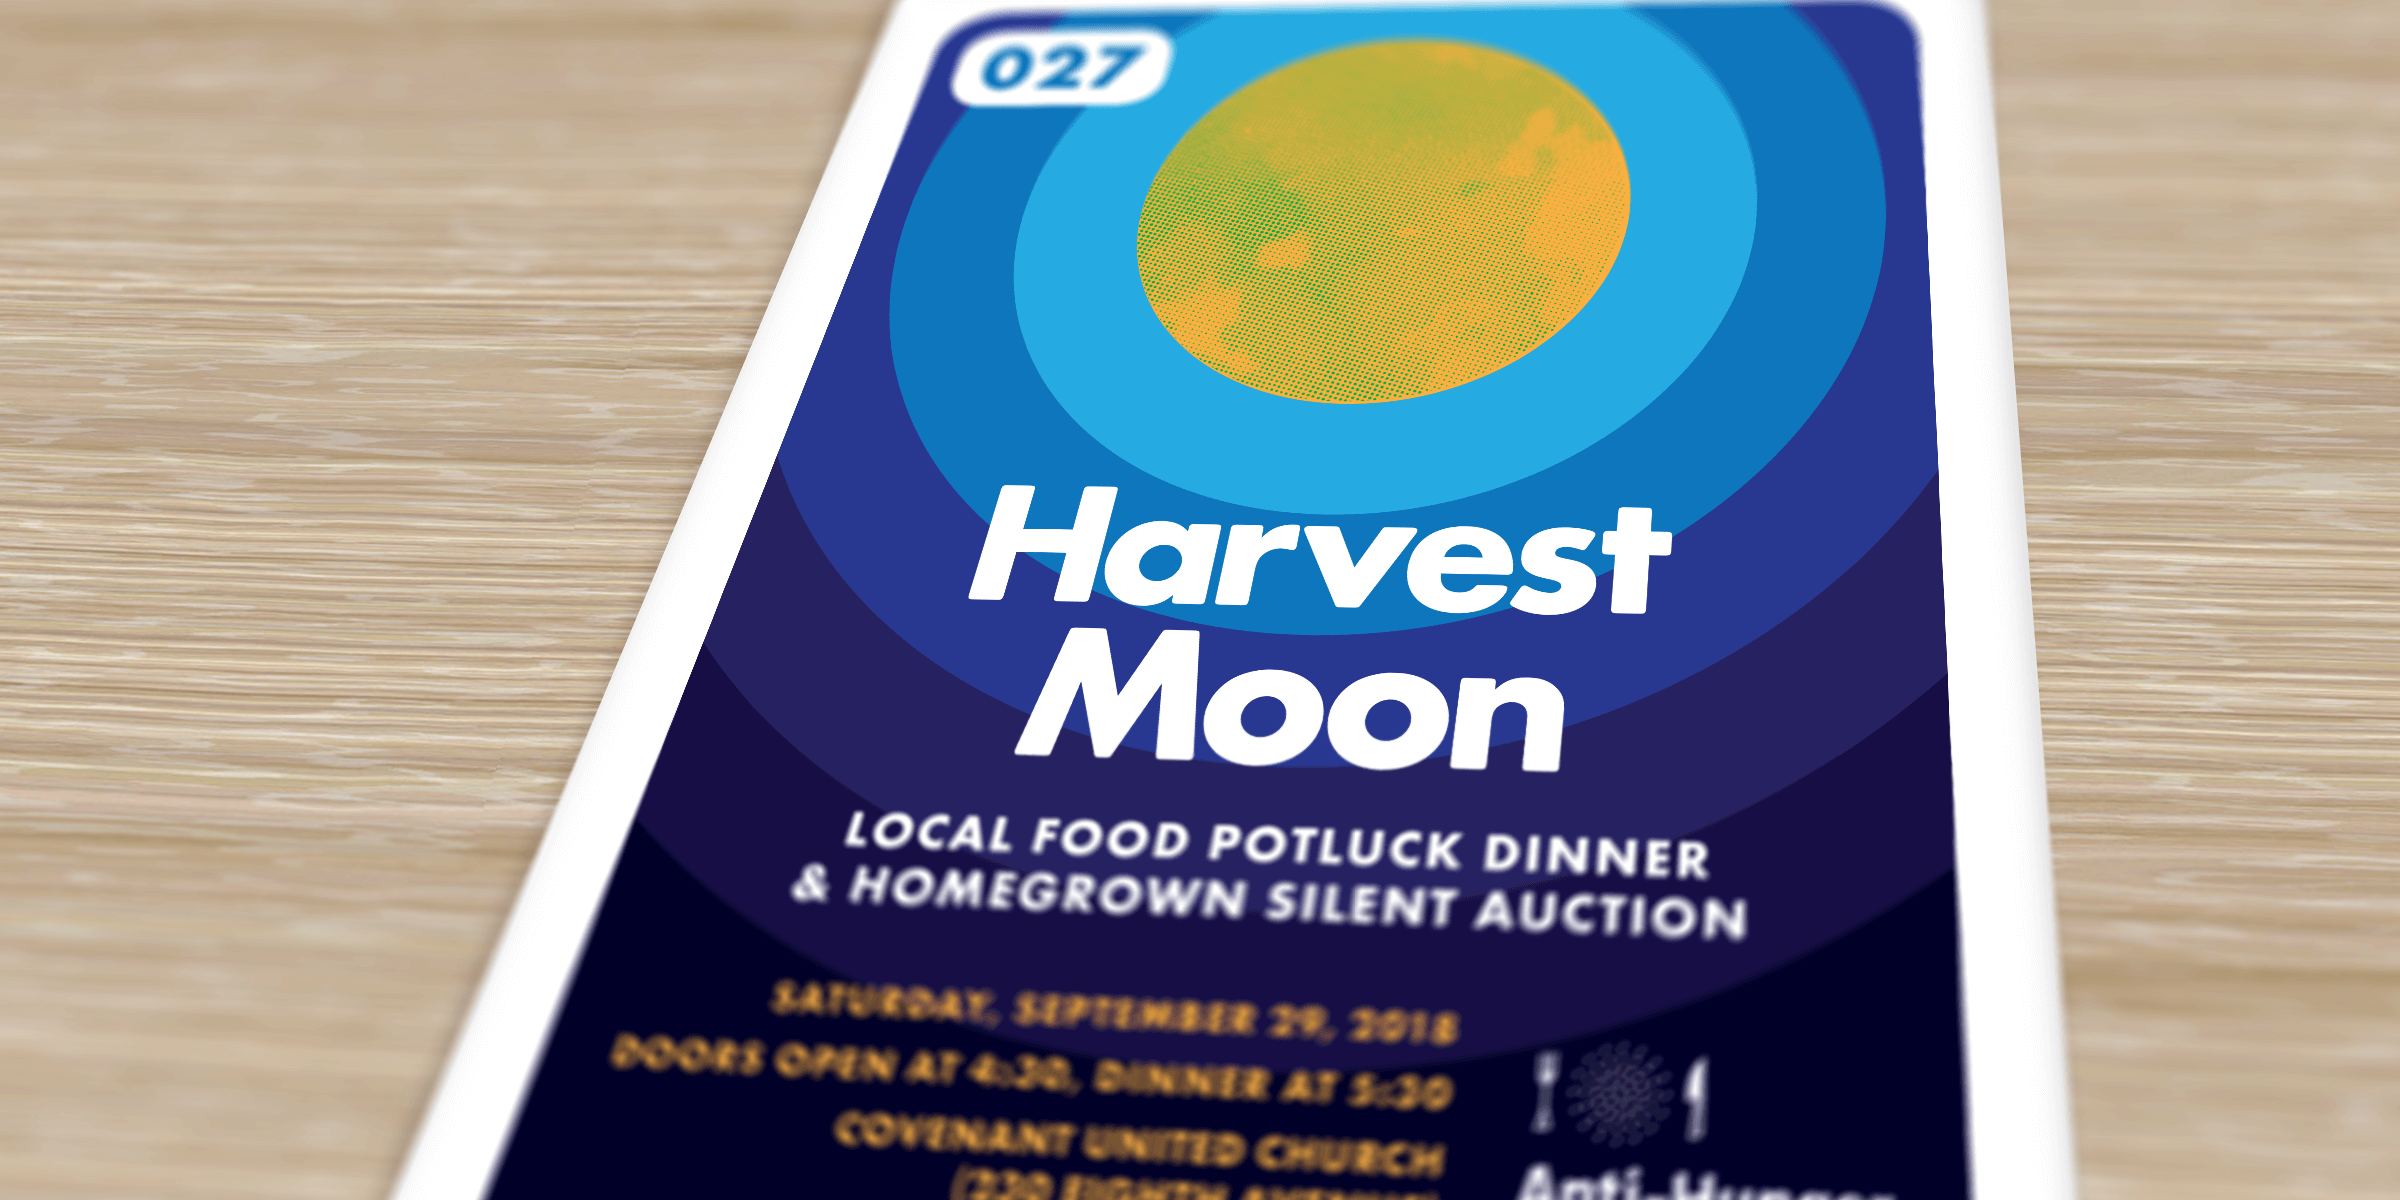 Ticket for Harvest Moon 2018